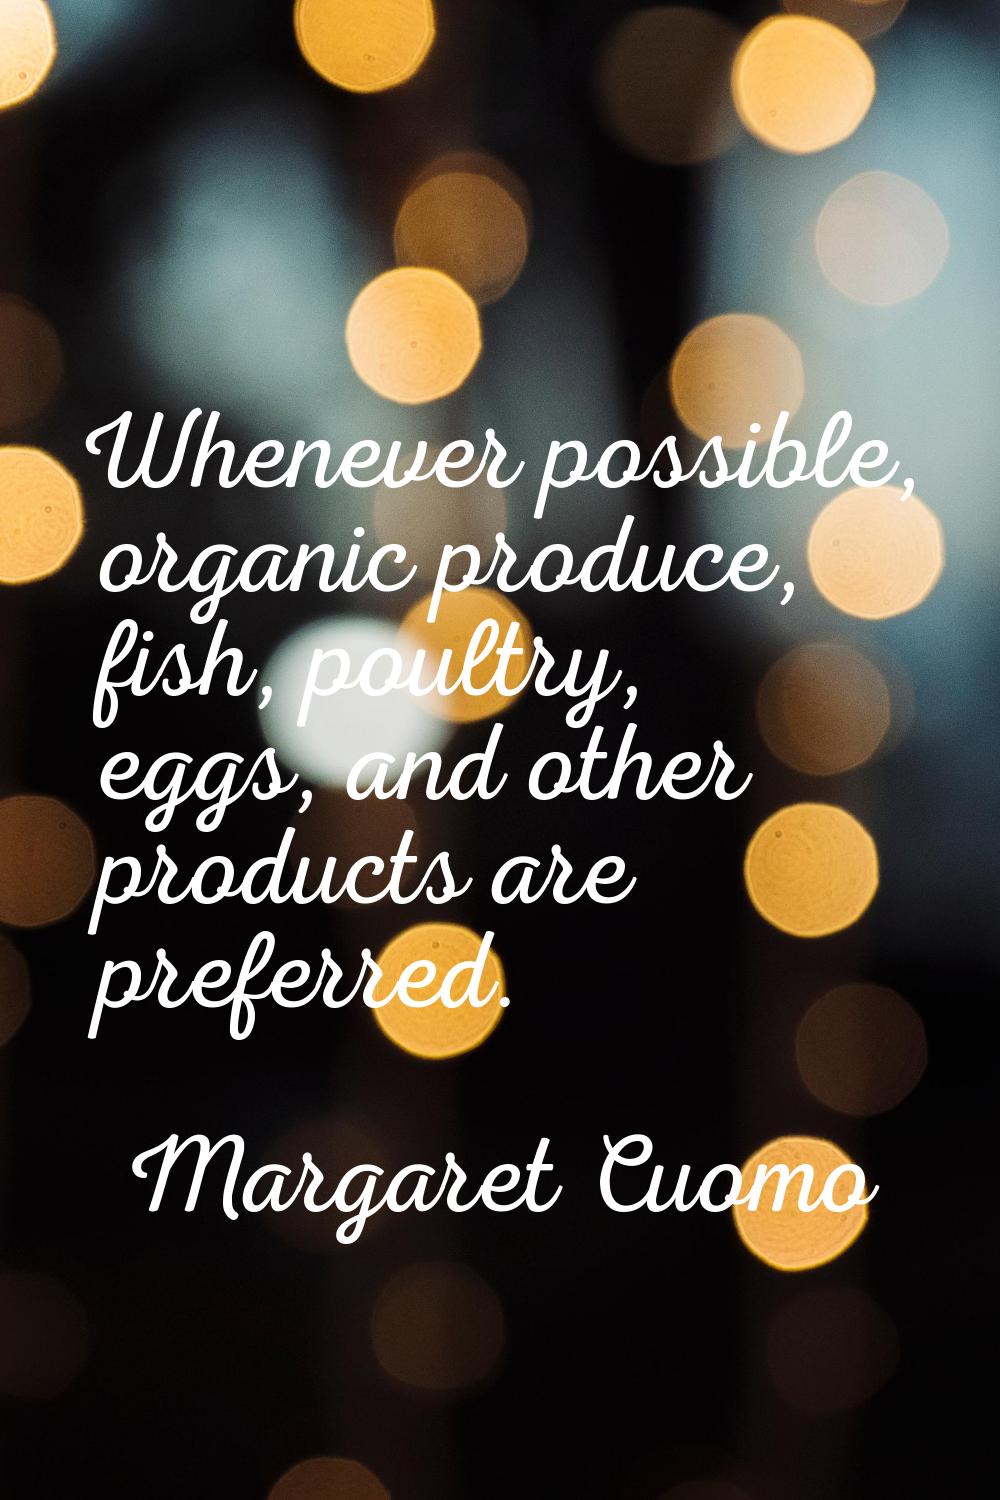 Whenever possible, organic produce, fish, poultry, eggs, and other products are preferred.